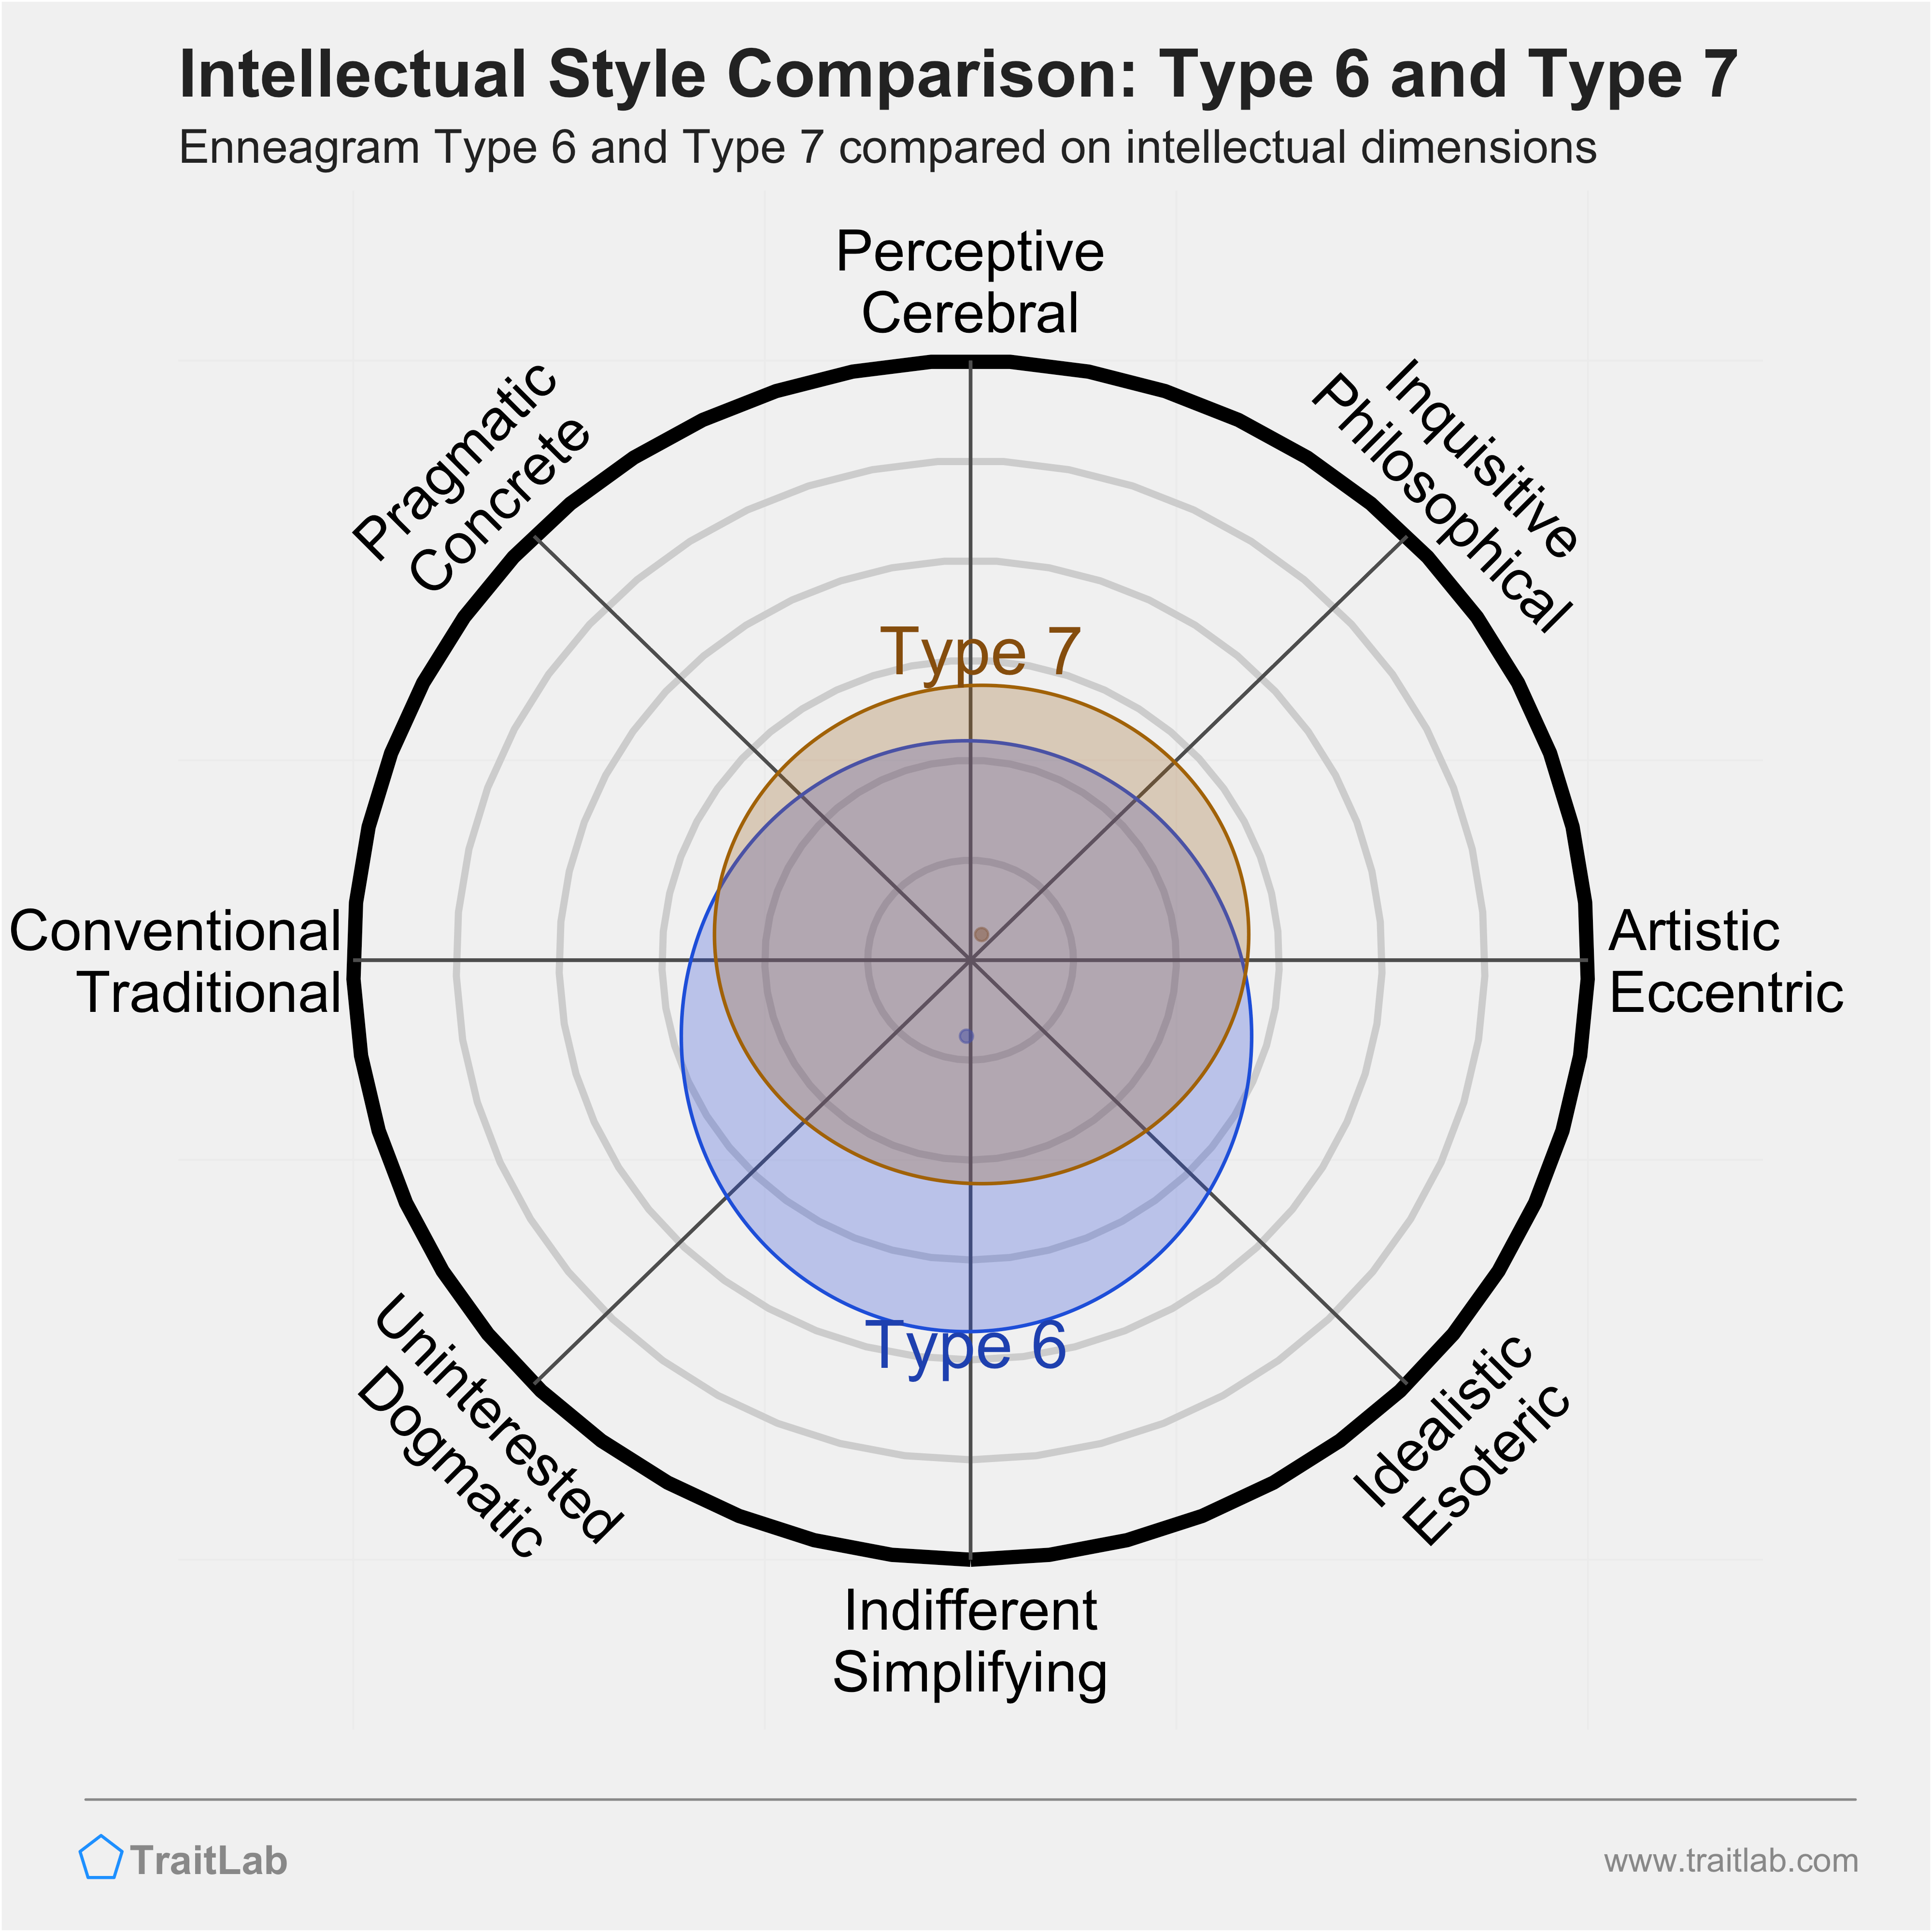 Type 6 and Type 7 comparison across intellectual dimensions